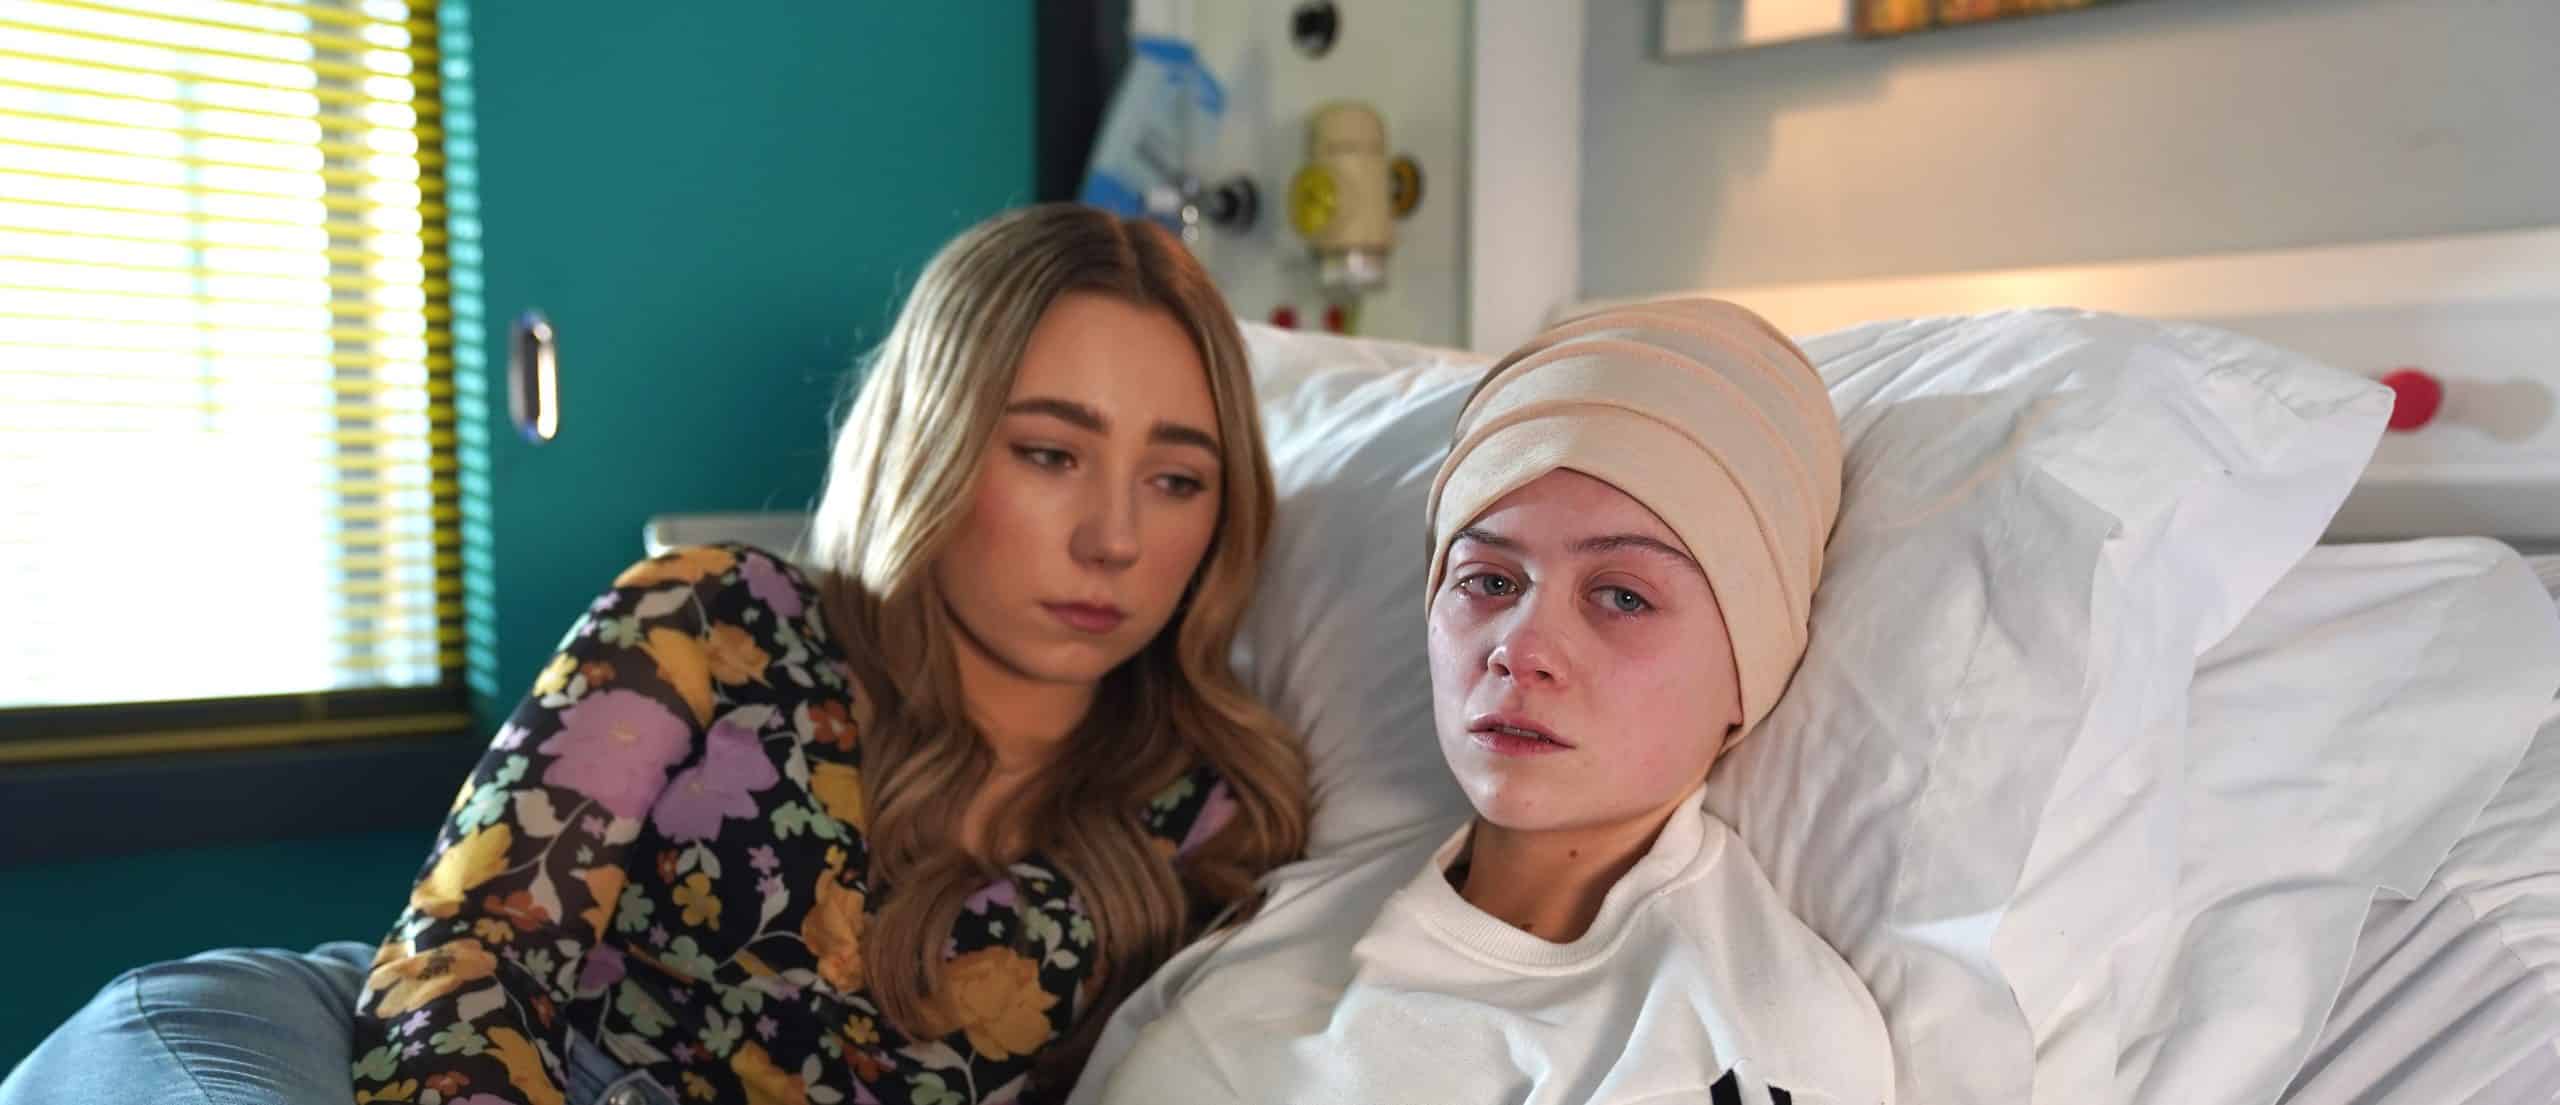 Hollyoaks air heart-breaking diagnosis for Juliet Nightingale